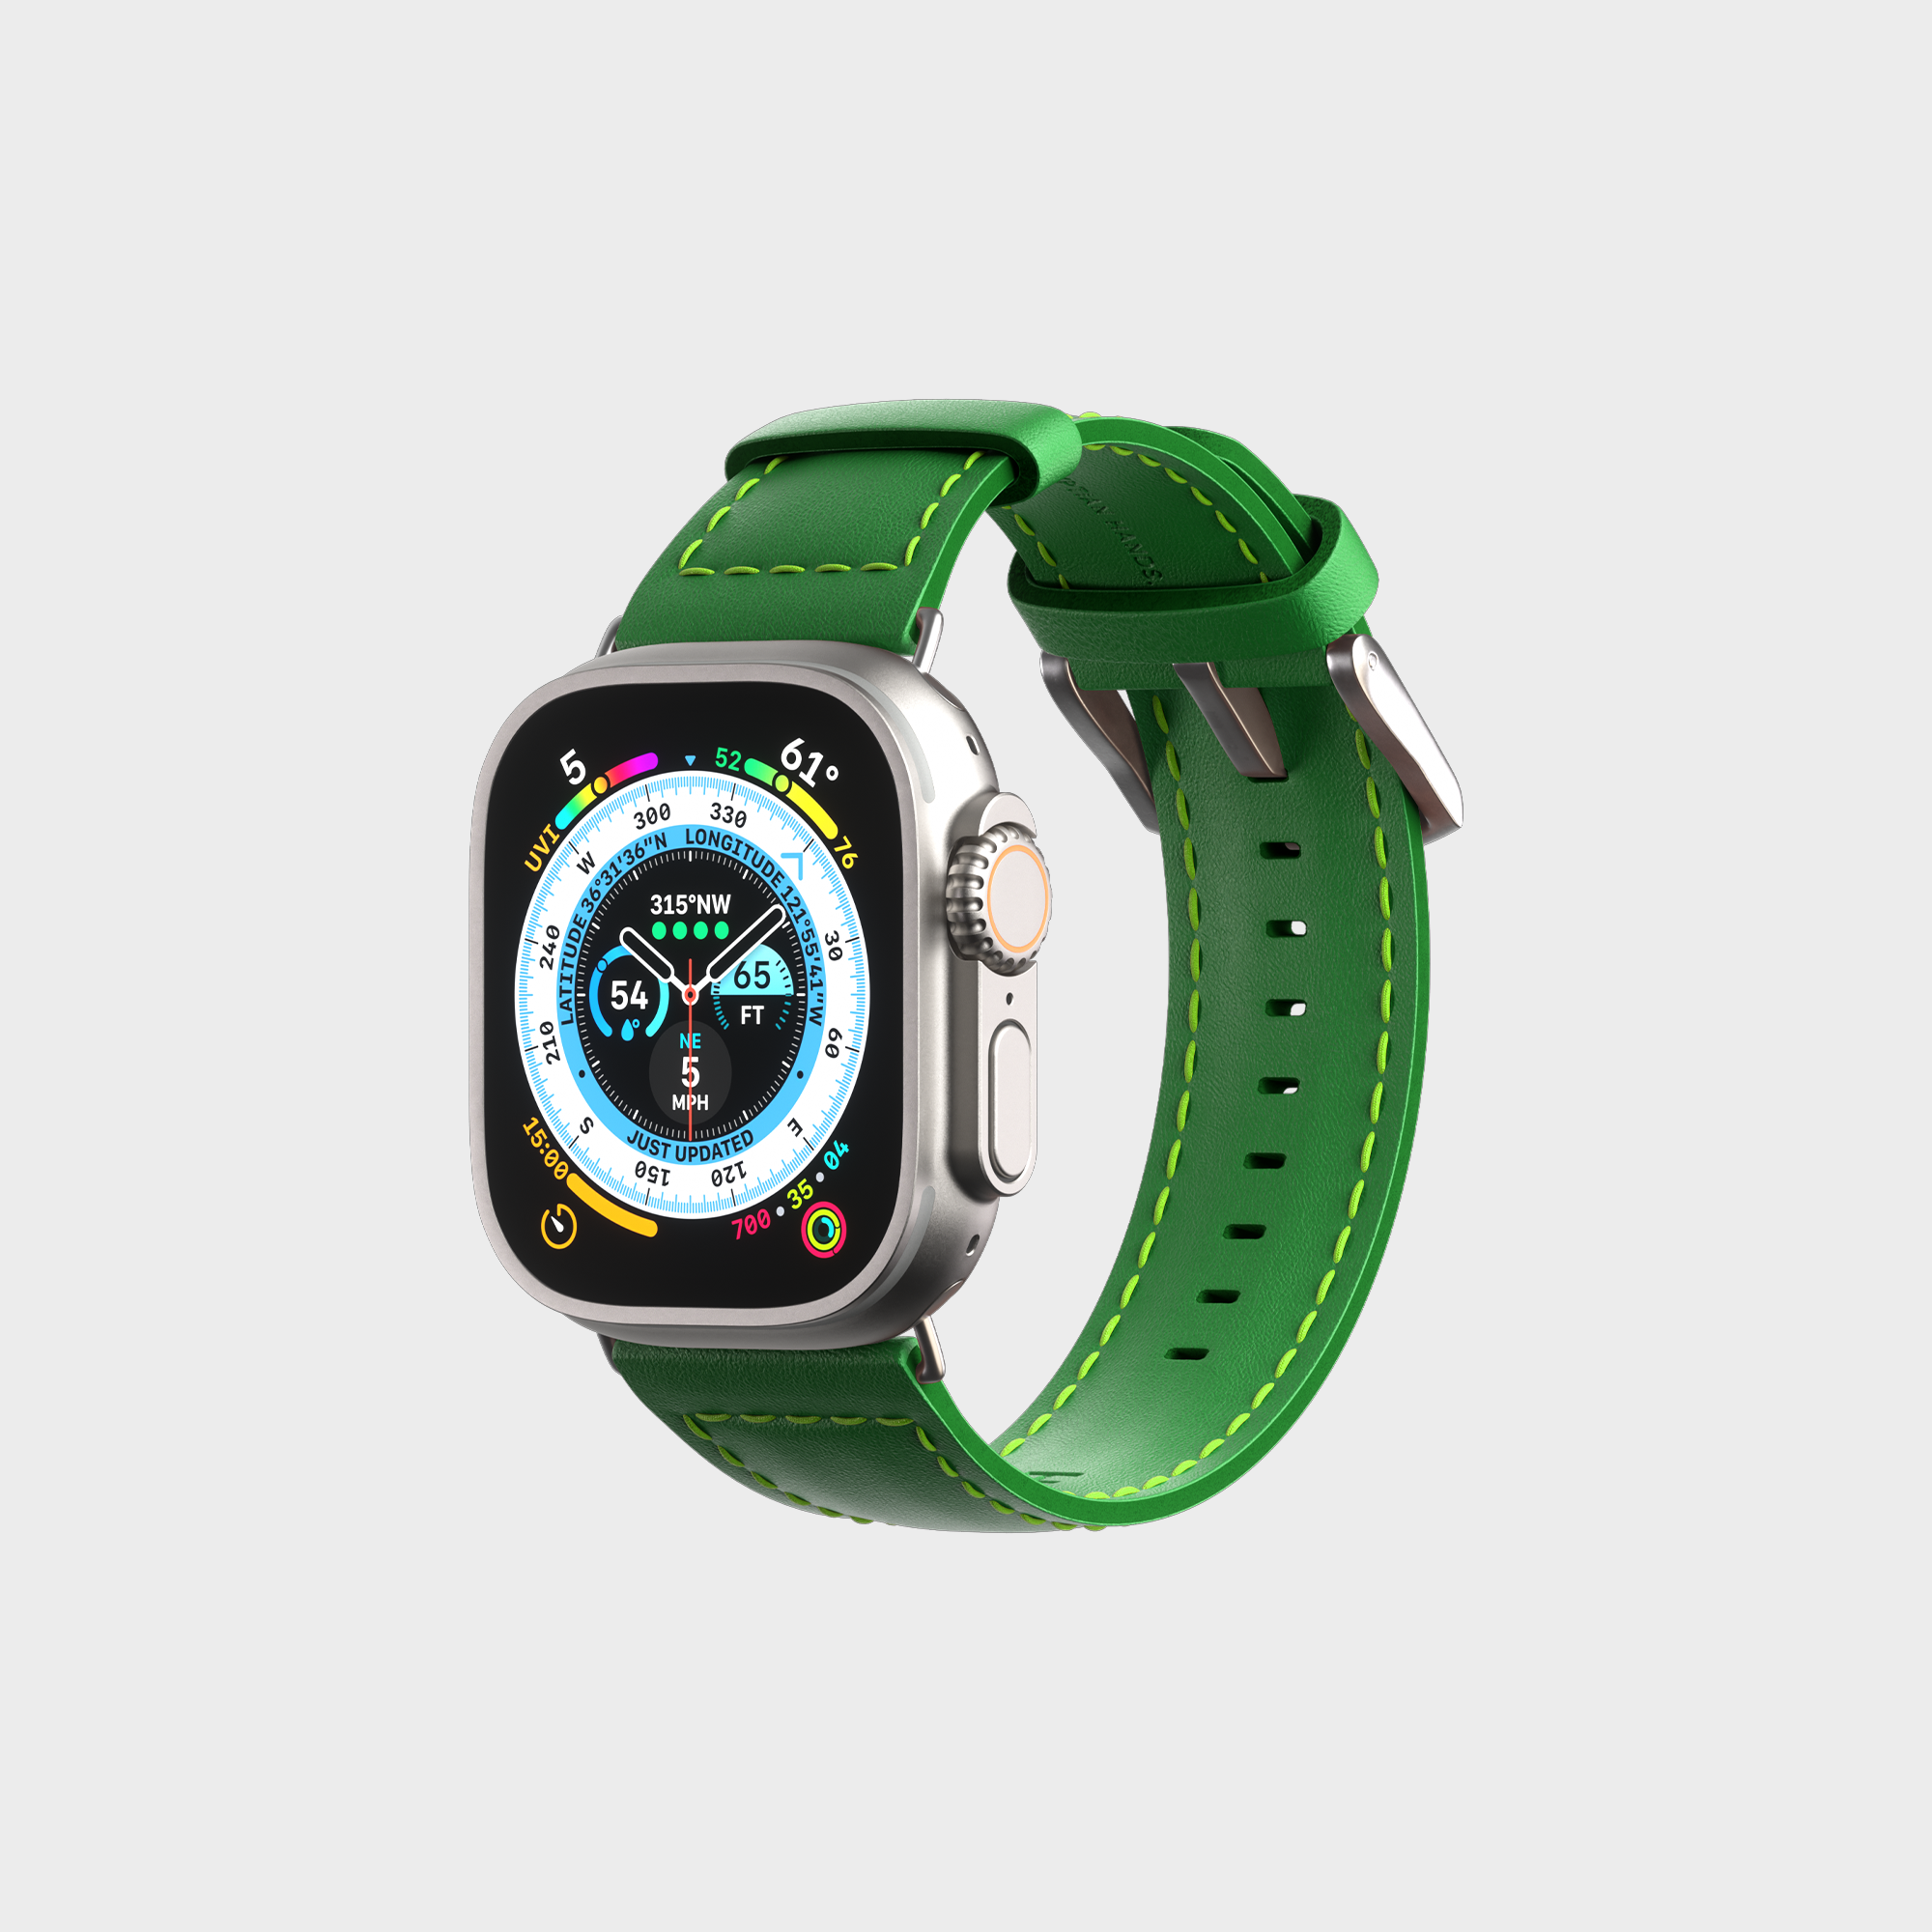 Smartwatch with green strap and digital compass display on white background.